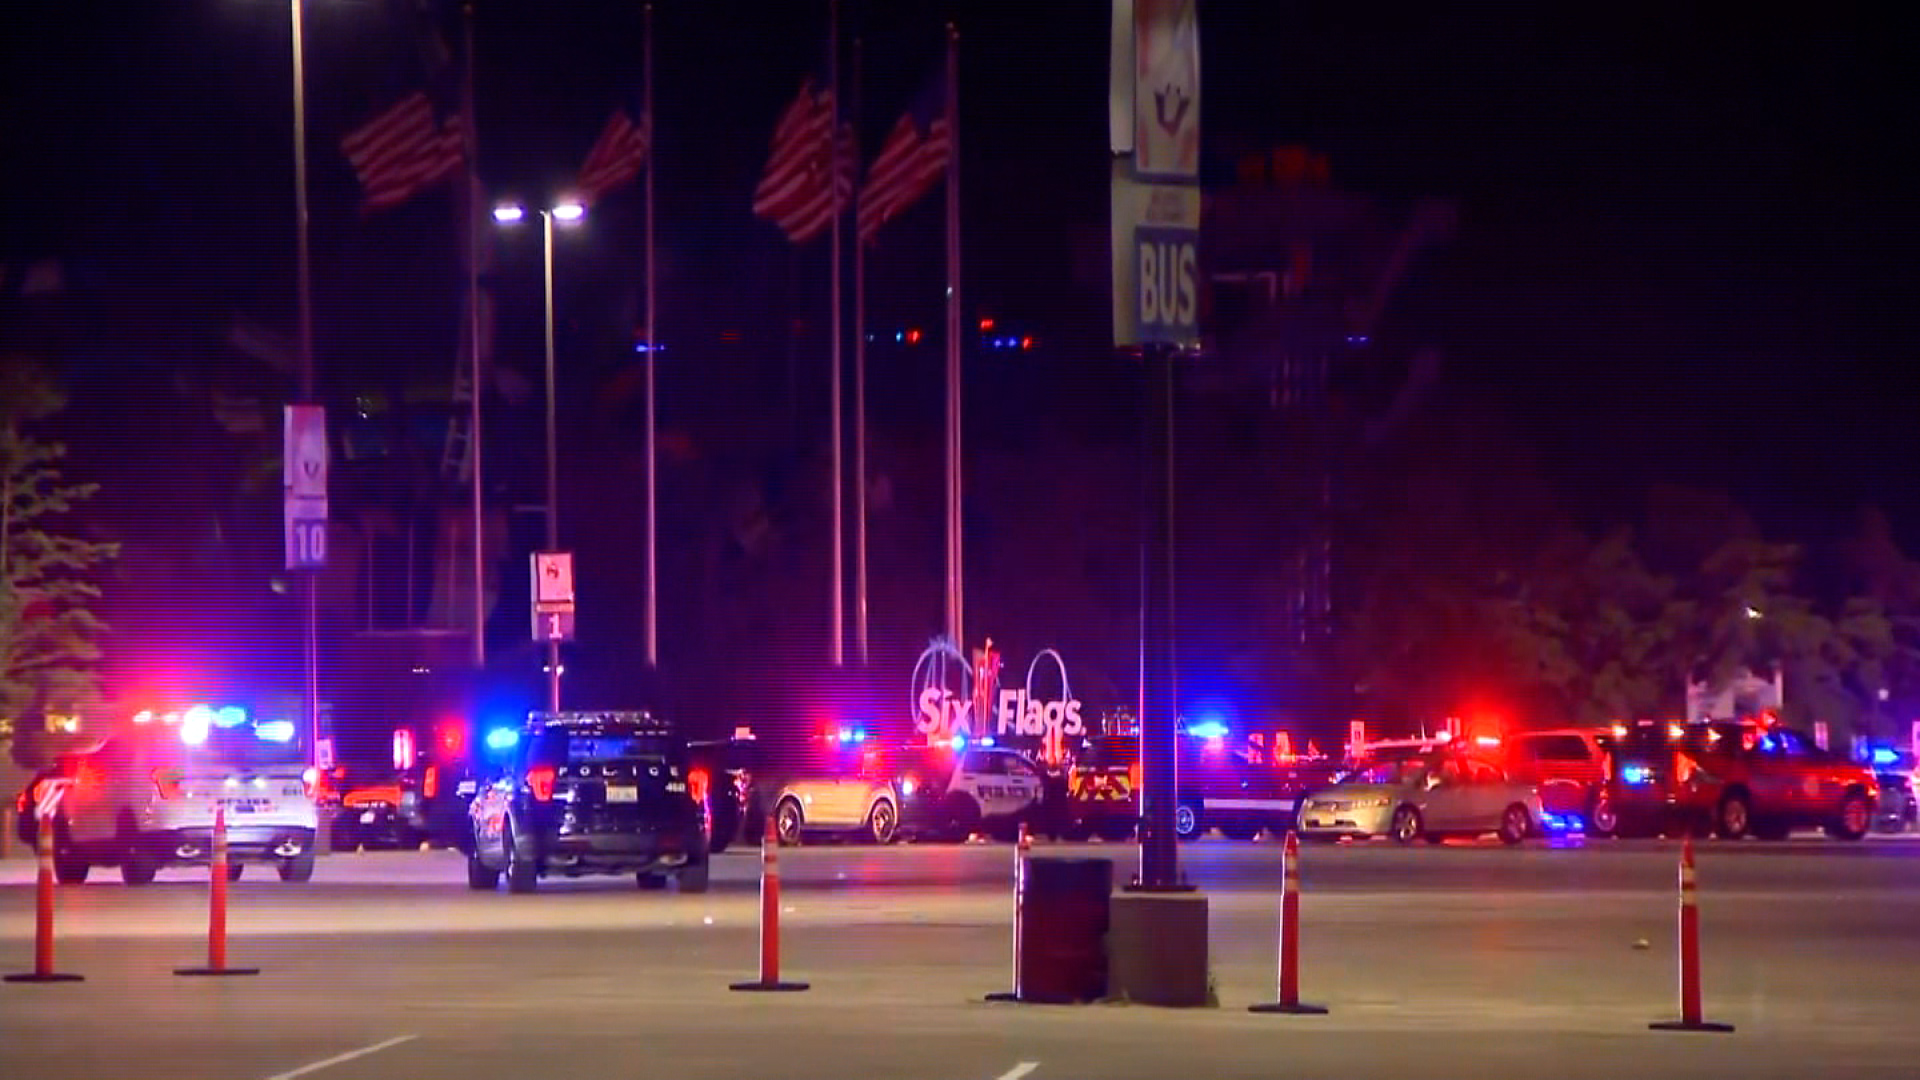 Three injured in shooting at Six Flags Great America in Illinois